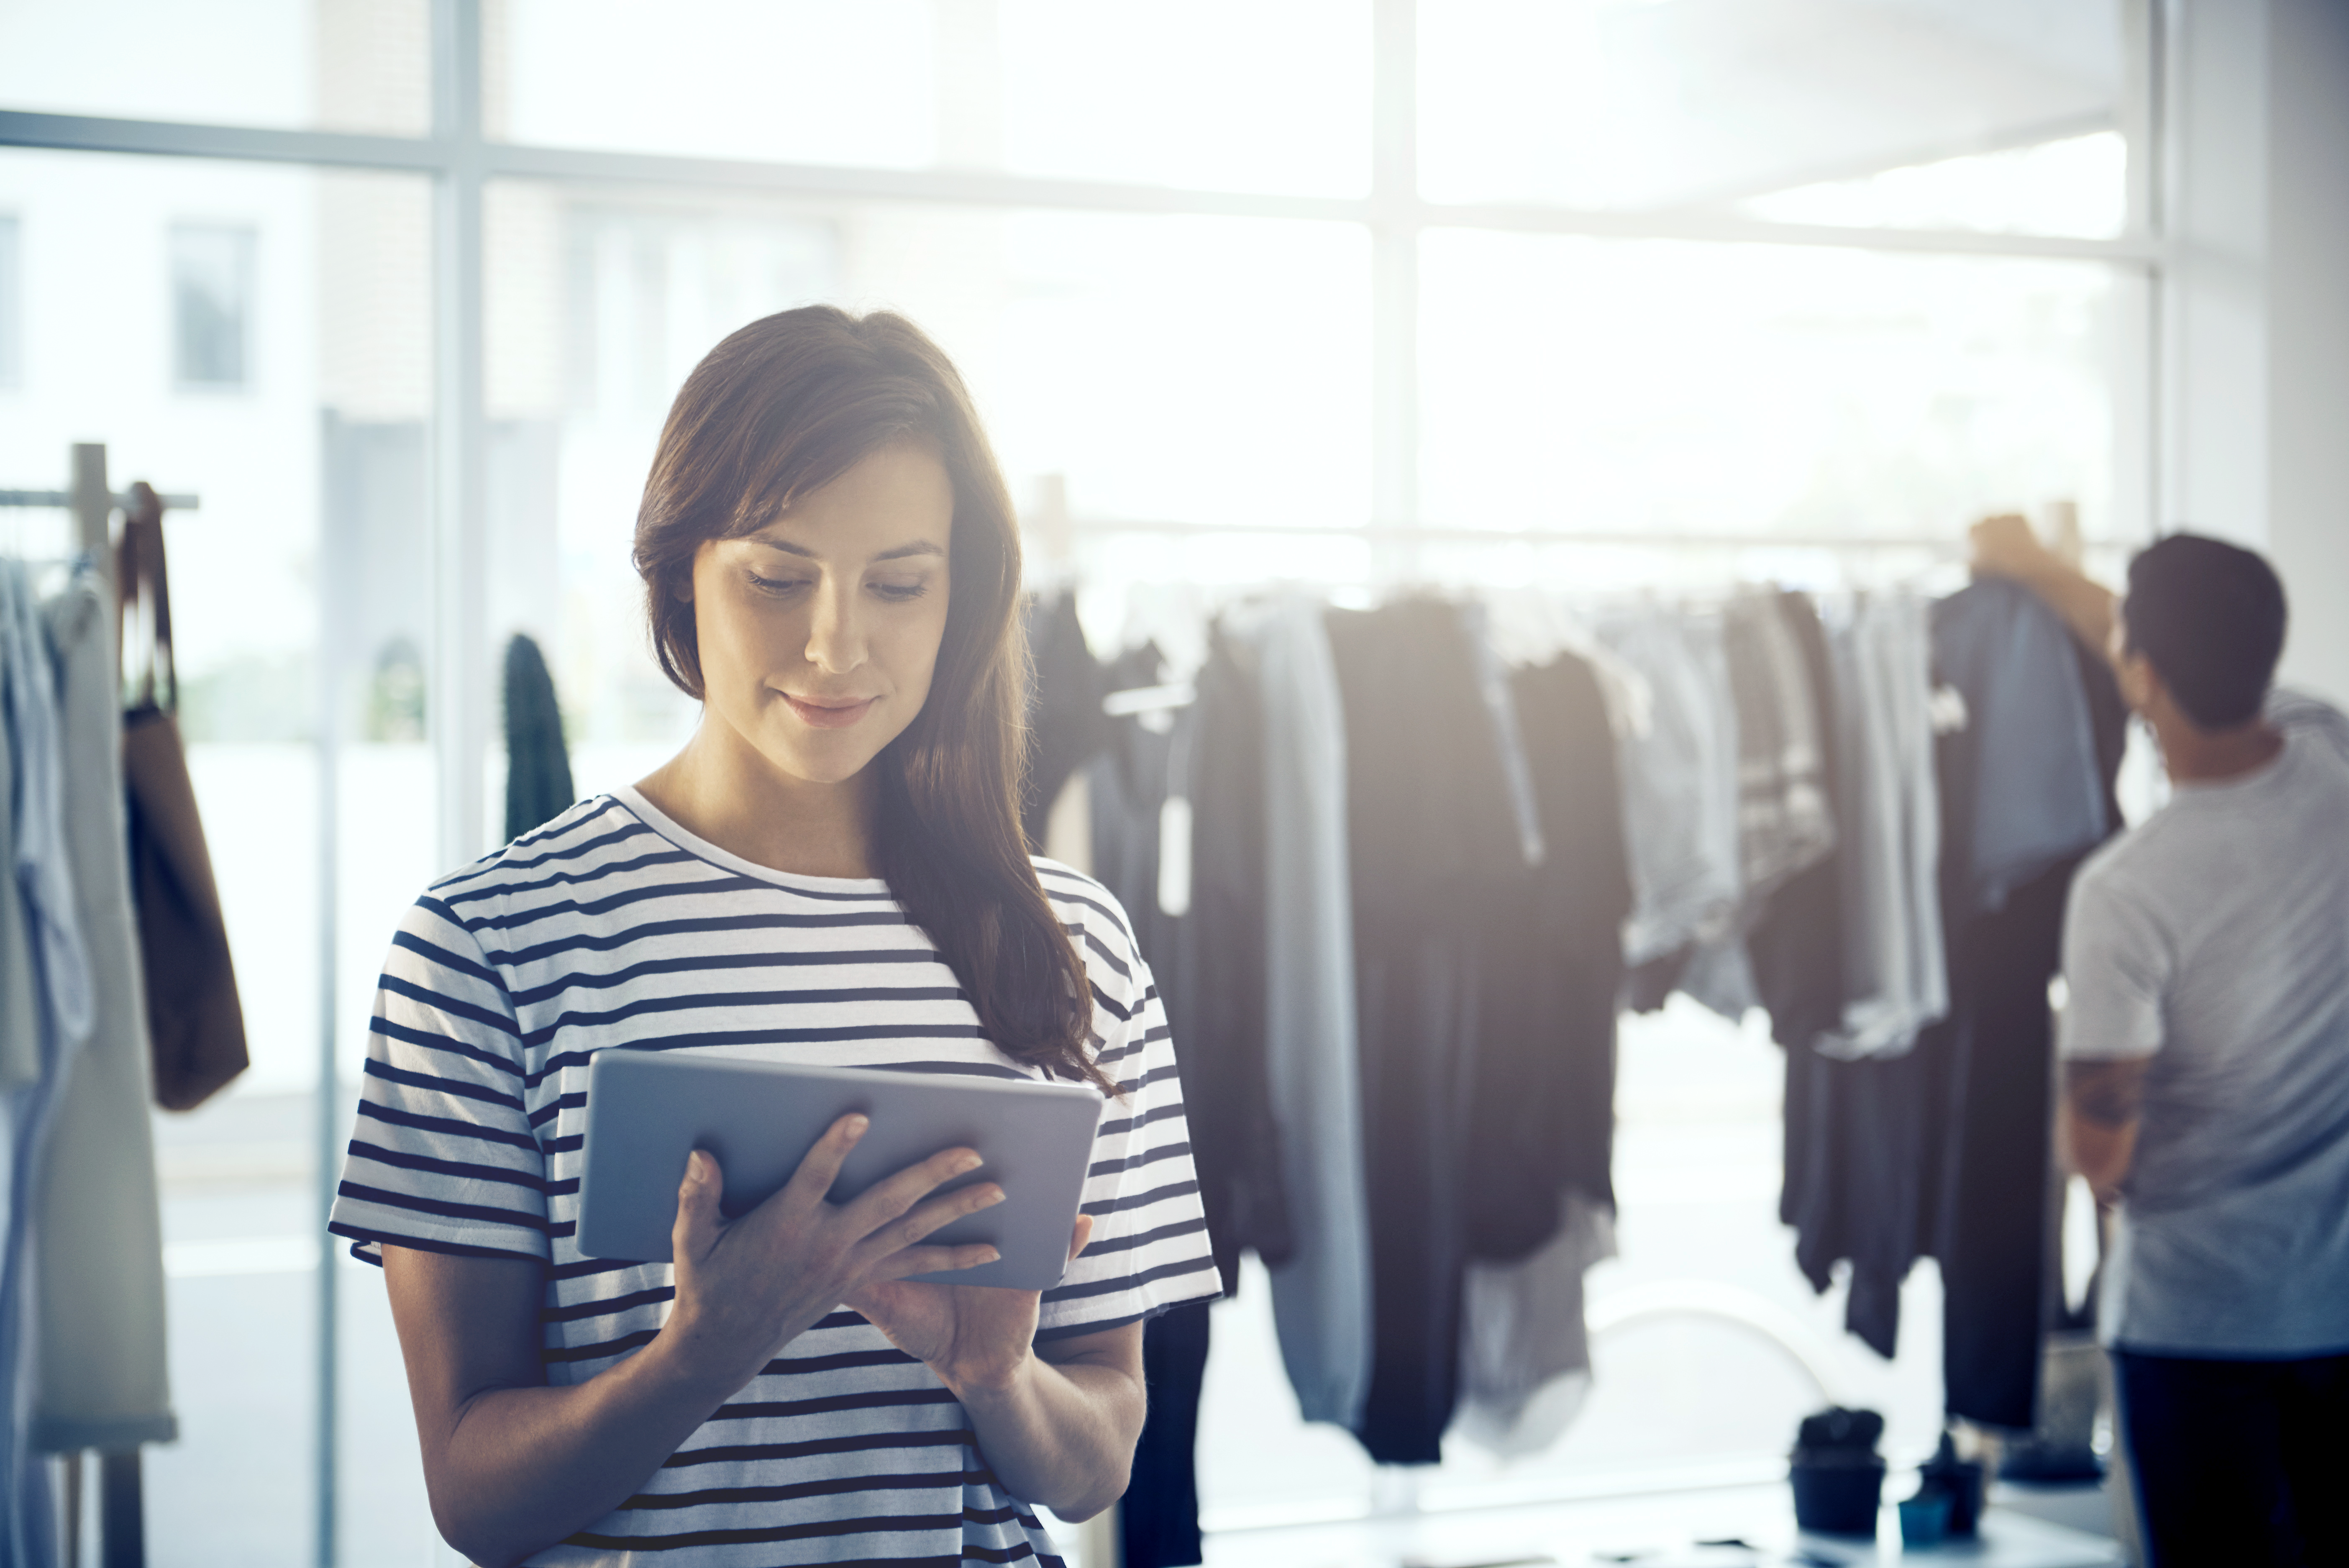 Personalize in-store experiences. First step? Security.